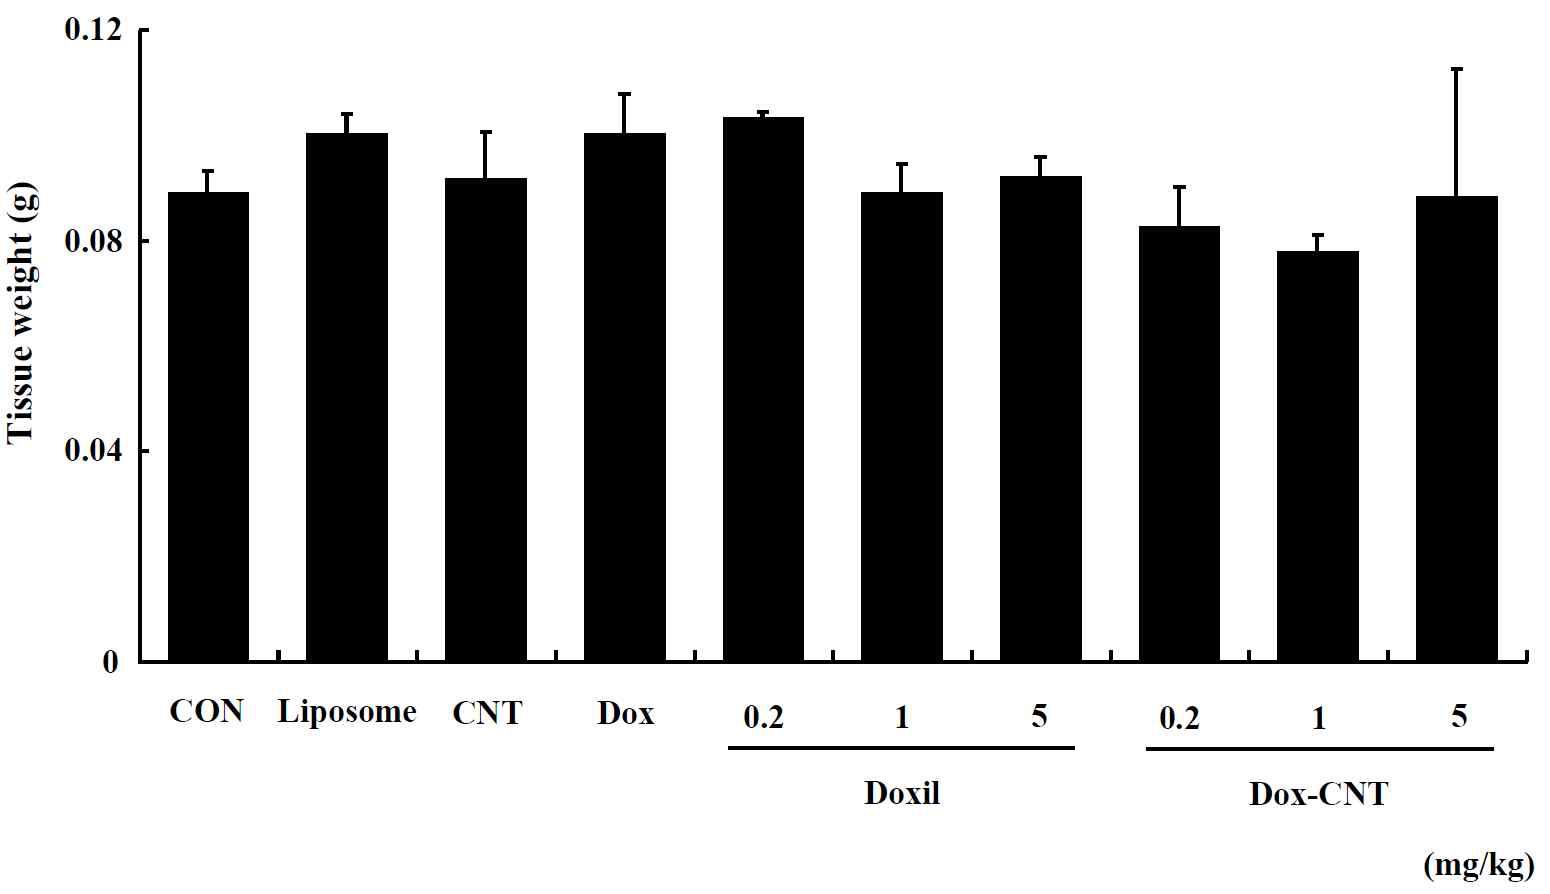 The change of spleen weight in single exposed female ICR mice for 14 days. Mice were respectively administered by intravenous injection with liposome, CNT, Dox, Doxil (0.2, 1, 5 mg/kg) and Dox-CNT (0.2, 1, 5 mg/kg). The results are presented as mean ± SE (n = 10). * p < 0.05, significantly different from the control.